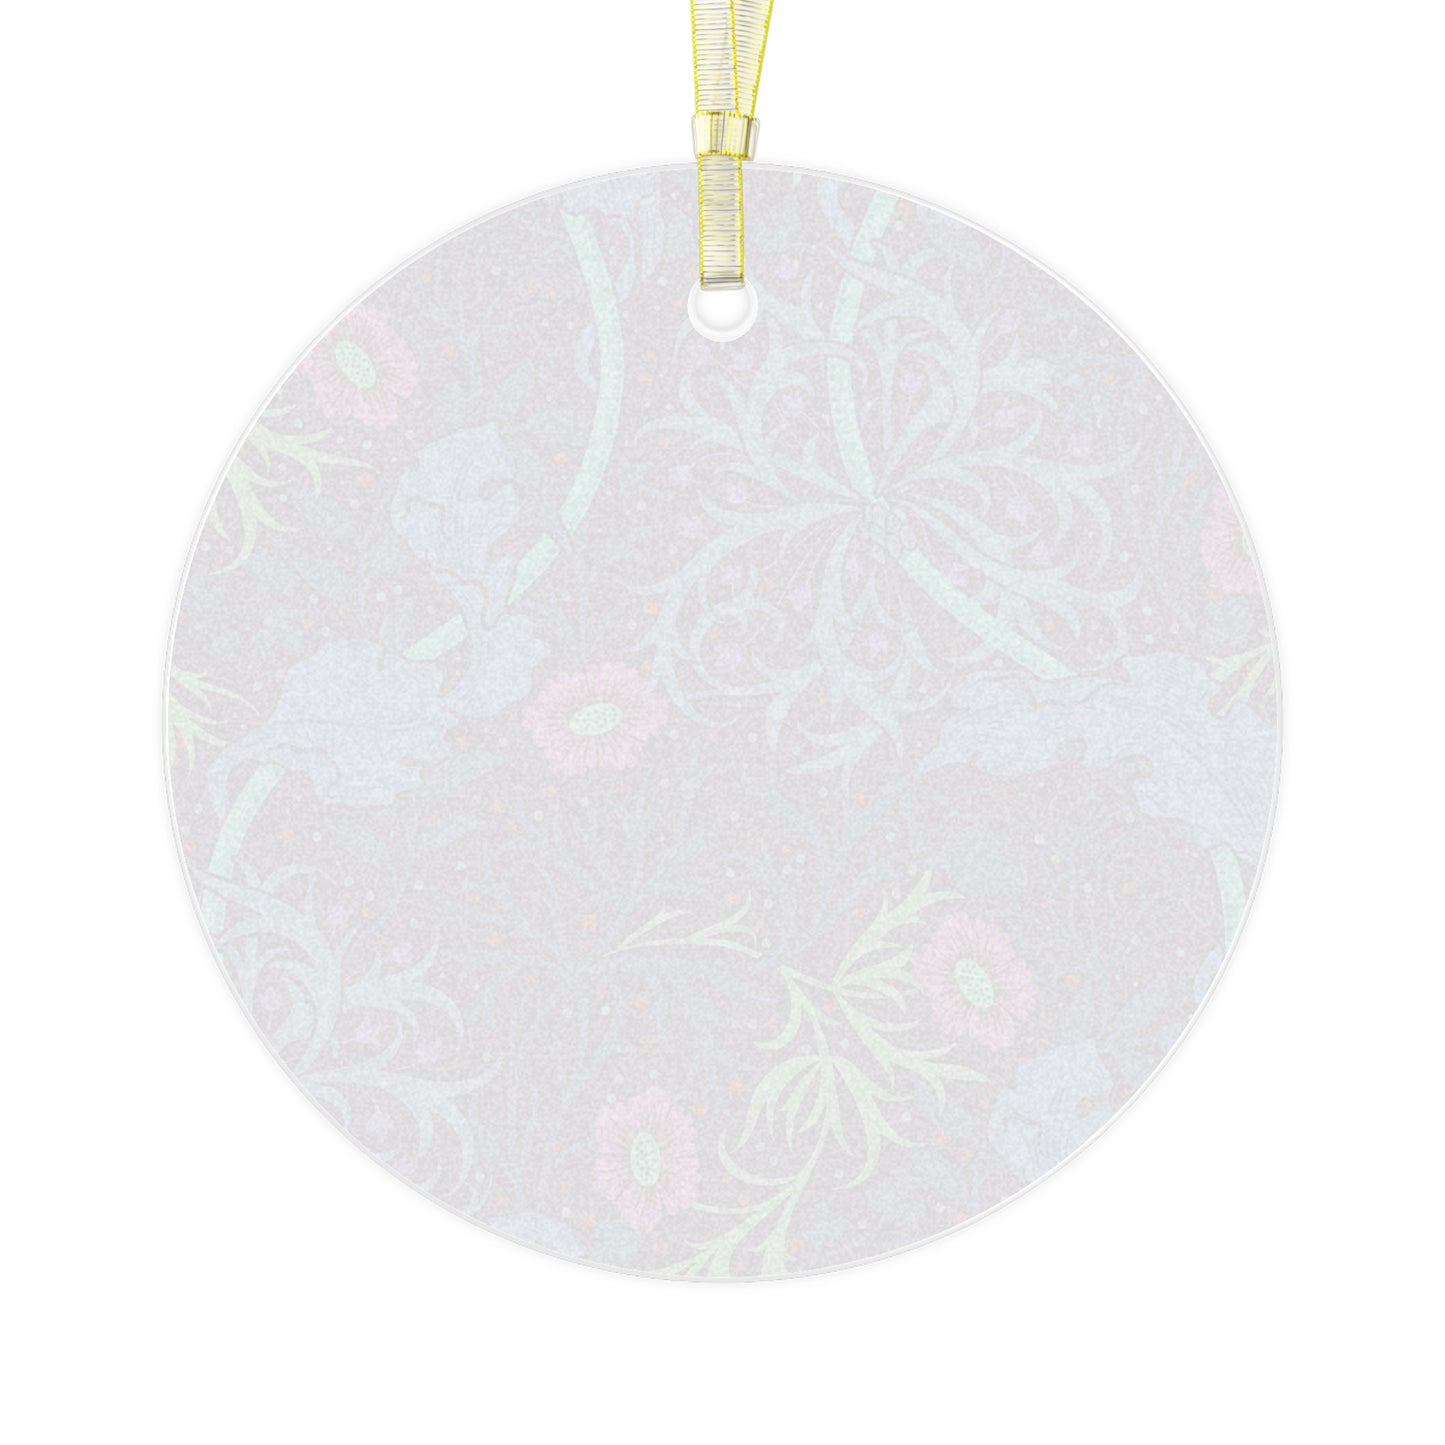 william-morris-co-christmas-heirloom-glass-ornament-seaweed-collection-pink-flowers-3